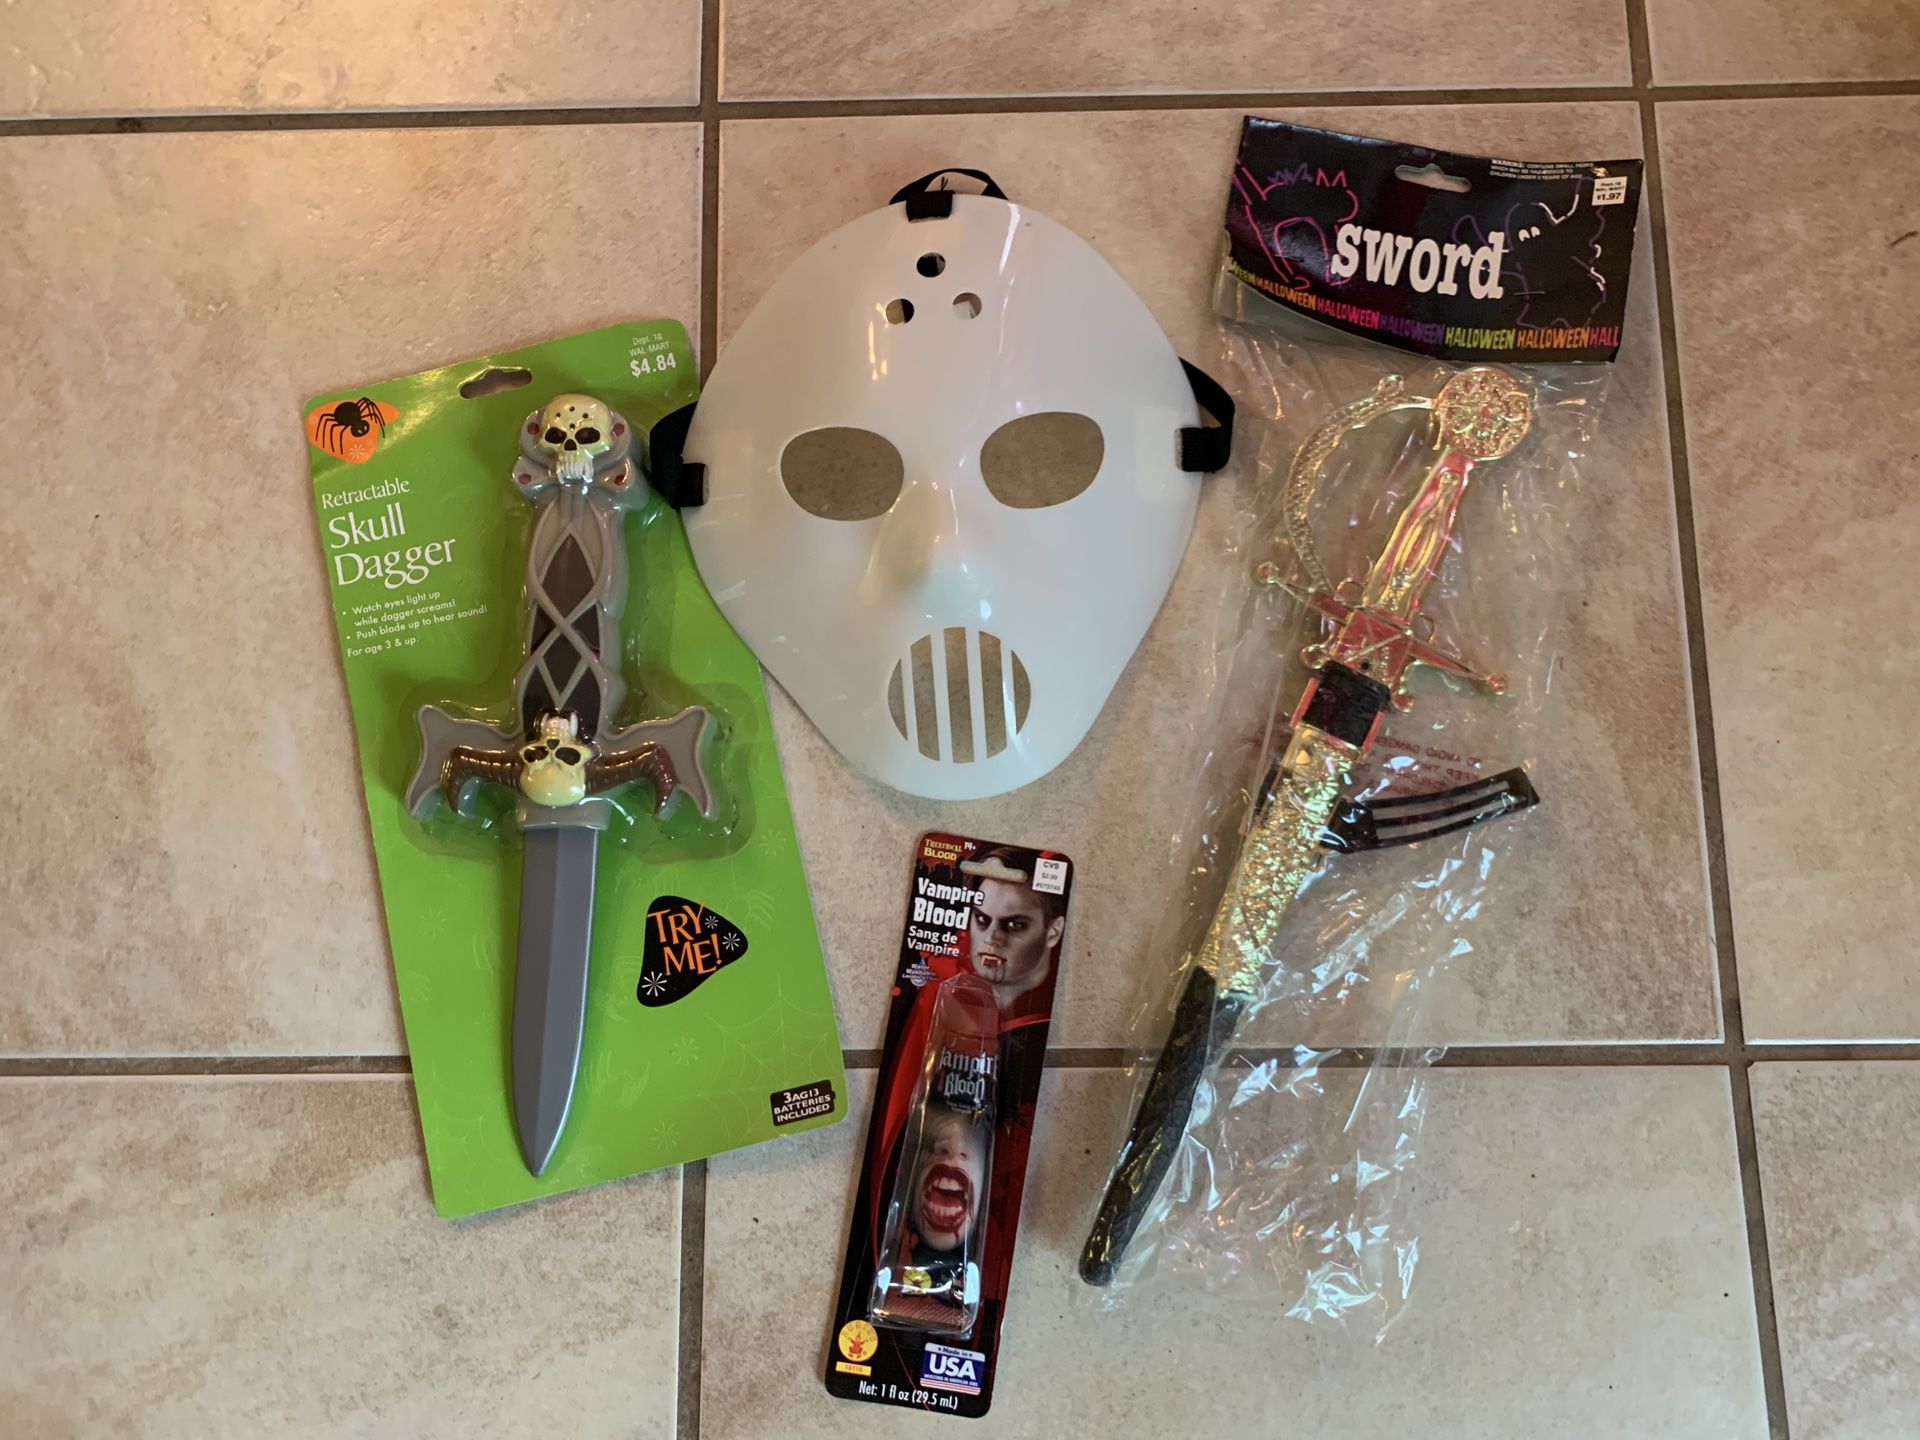 Friday the 13th costume accessories